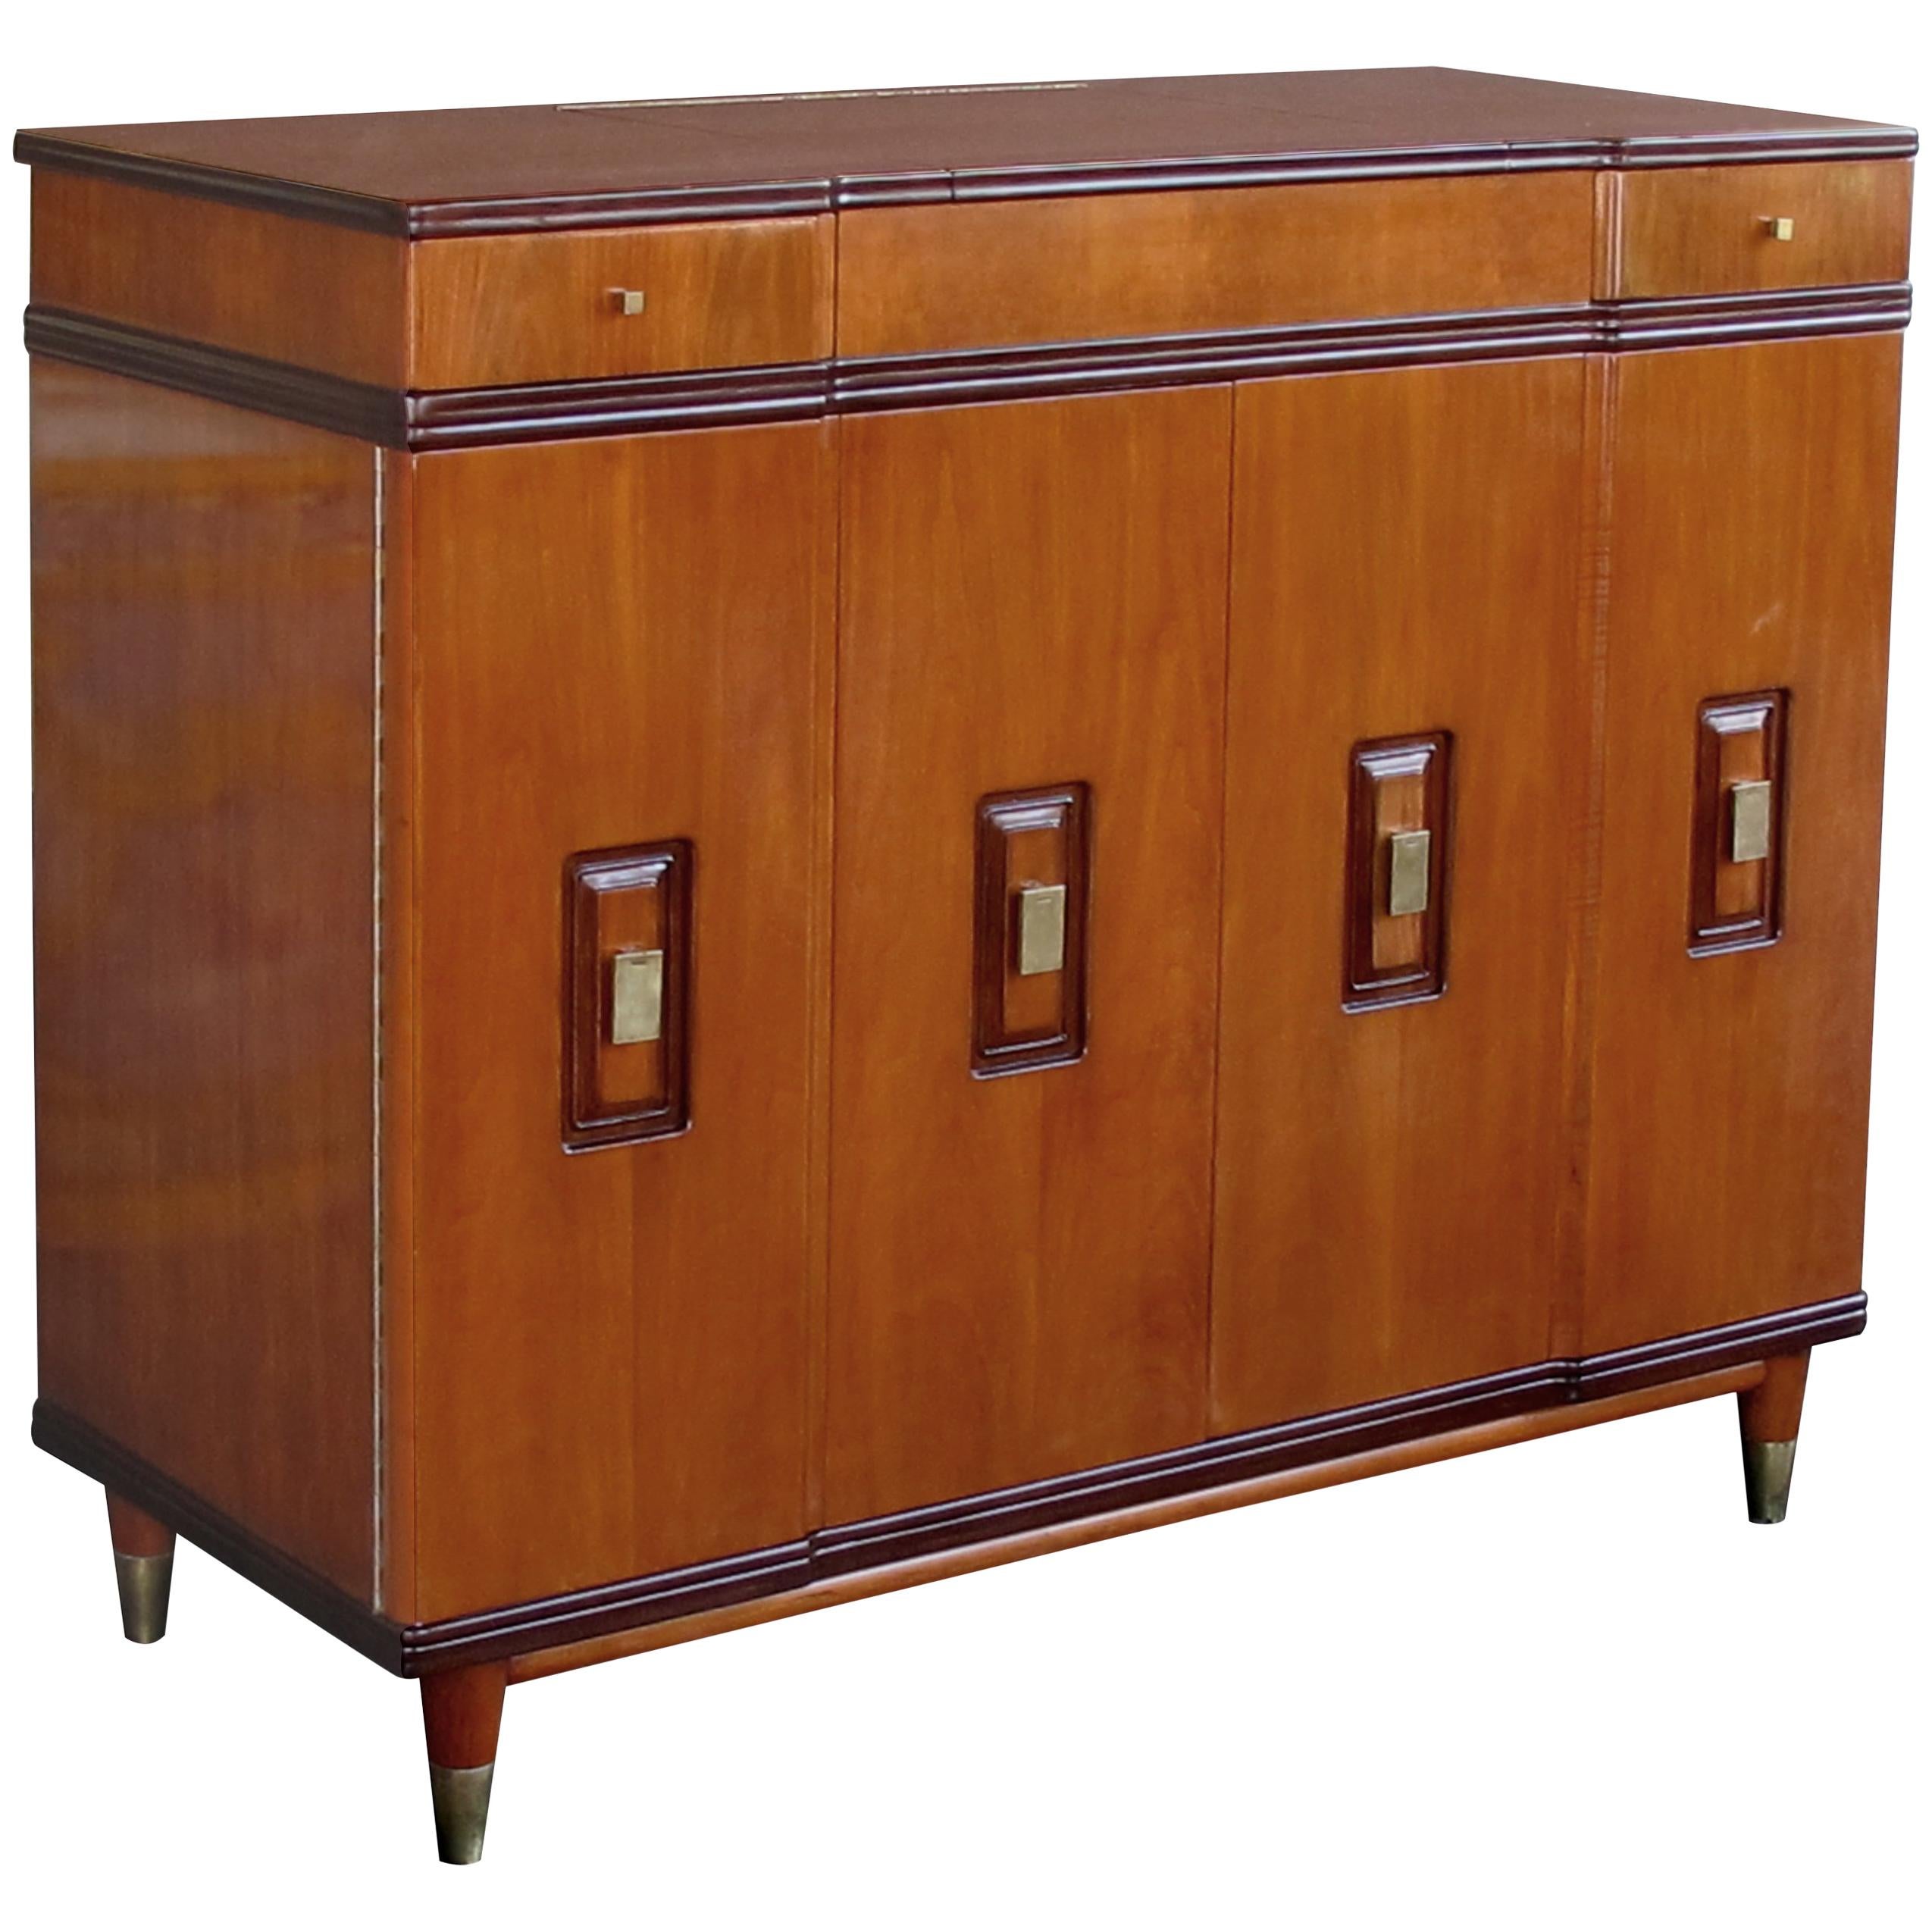 Handsome and Rare American Midcentury Walnut Dressing Cabinet by Widdicomb